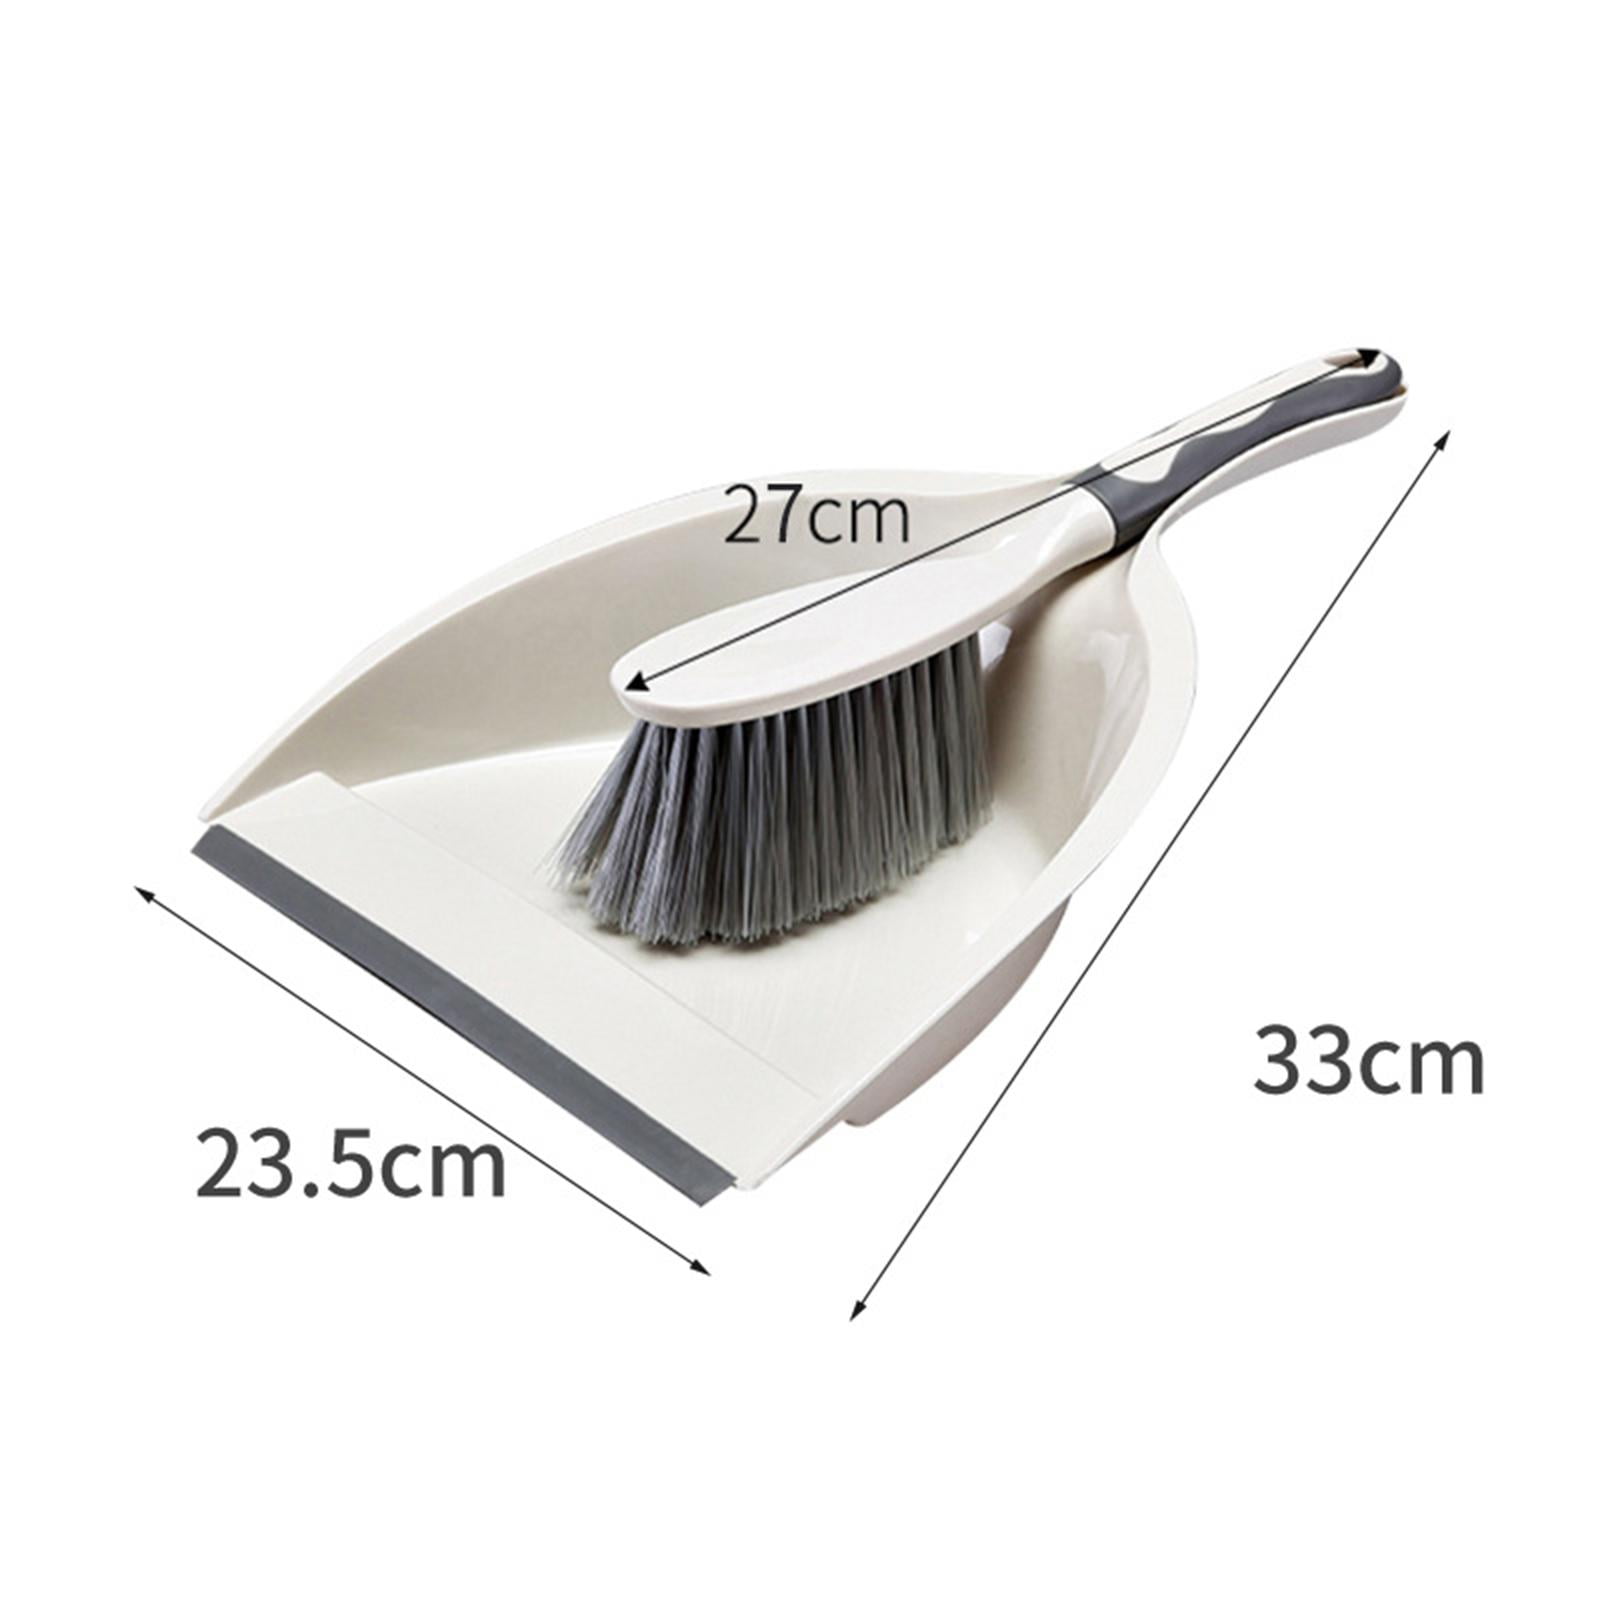 Cleaning Dust Pan & Brush by Scrub Buddies Whisk Broom Portable